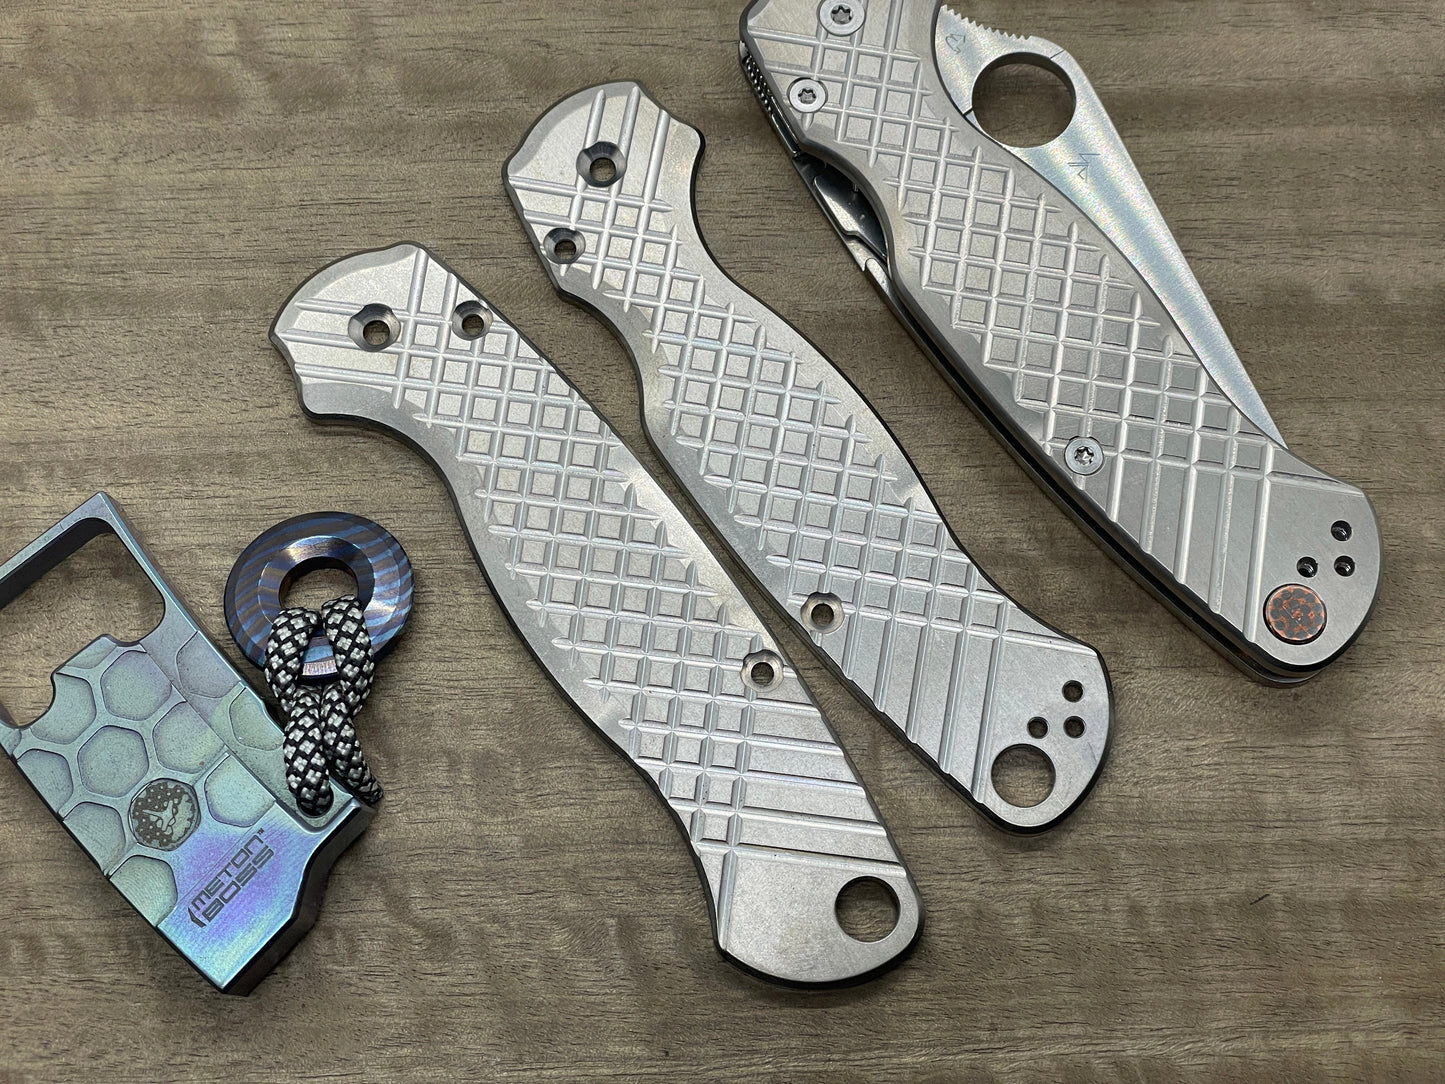 Stone Washed FRAG milled Titanium scales for Spyderco Paramilitary 2 PM2